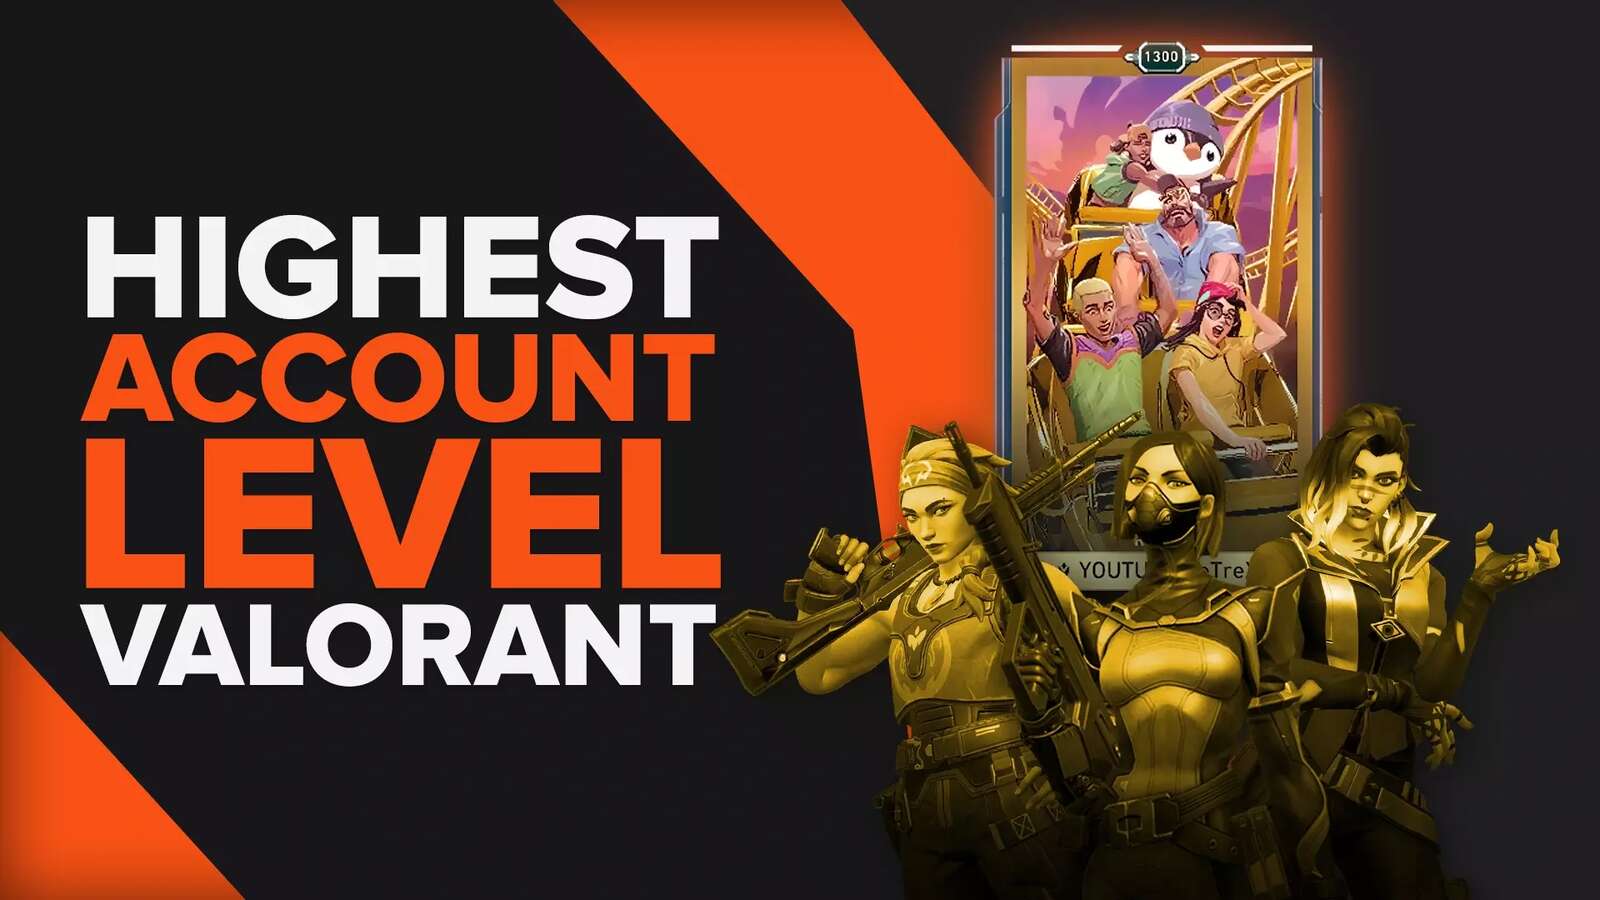 What Is The Highest Account Level In Valorant? [1000+]